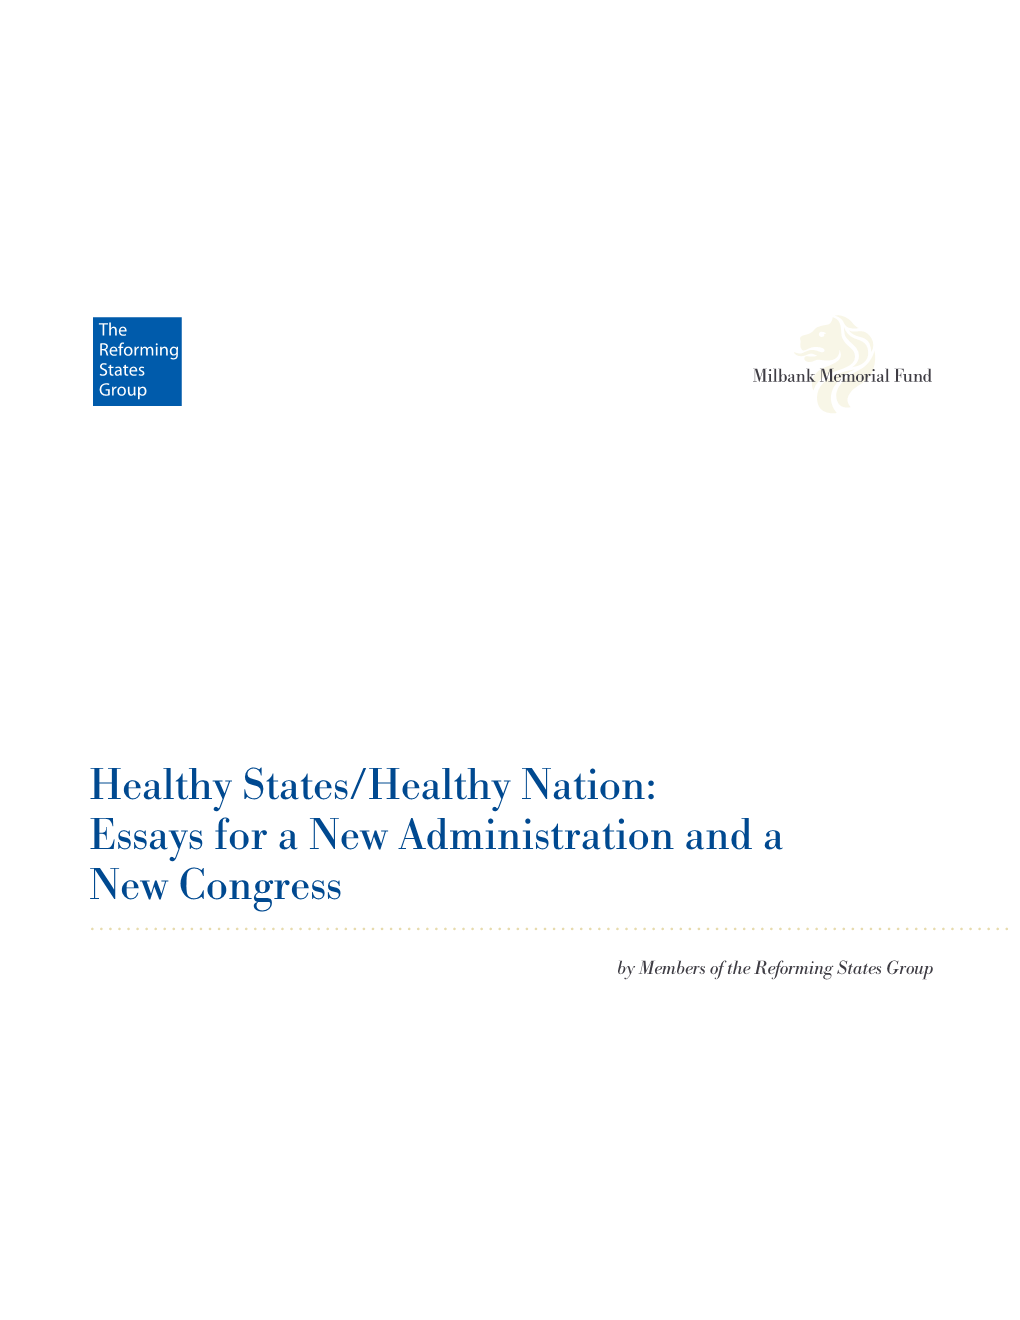 Healthy States/Healthy Nation: Essays for a New Administration and a New Congress